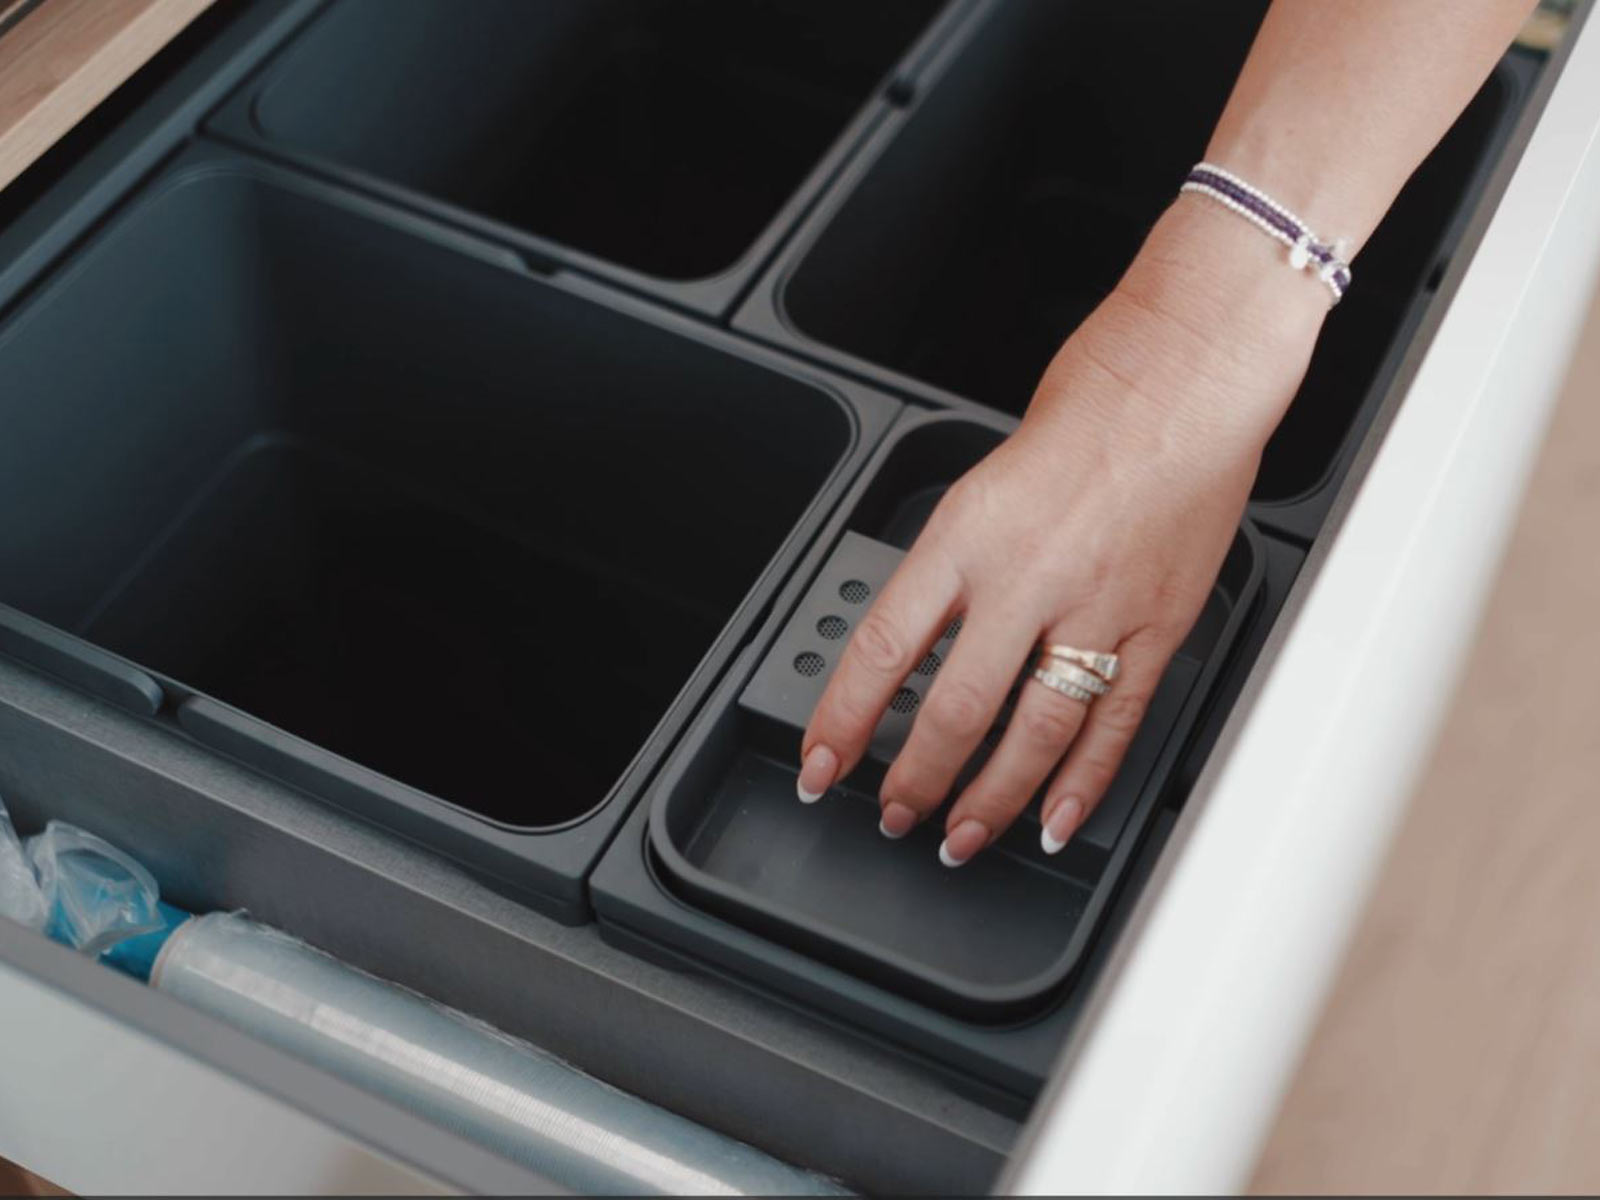 Integrated kitchen bin for recycling and food storage containers